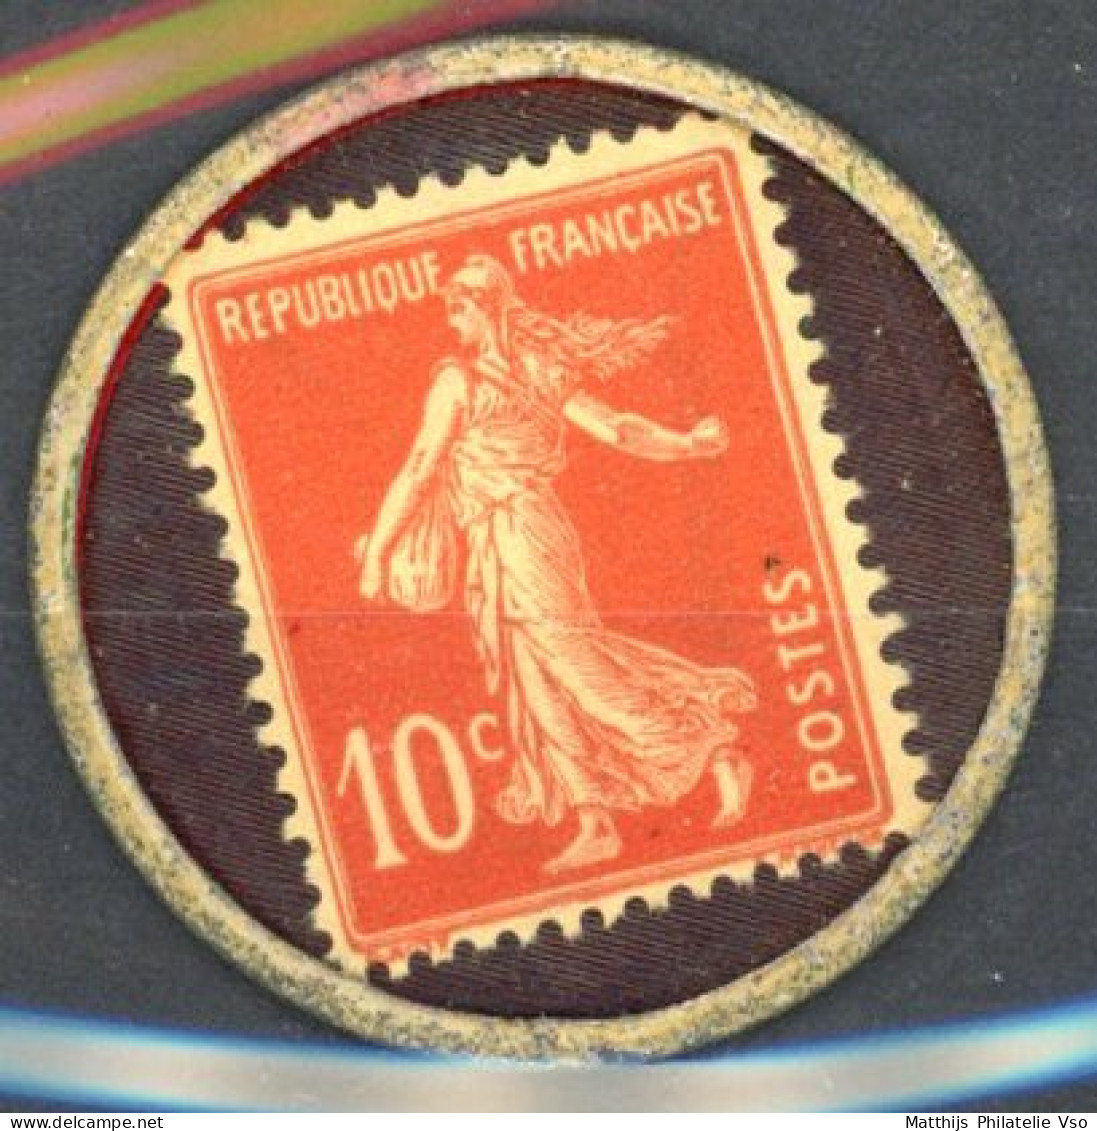 [(*) SUP] N° 138, 10c Rouge, Timbre Monnaie - Boulets Anthracite Charbon - 1903-60 Sower - Ligned